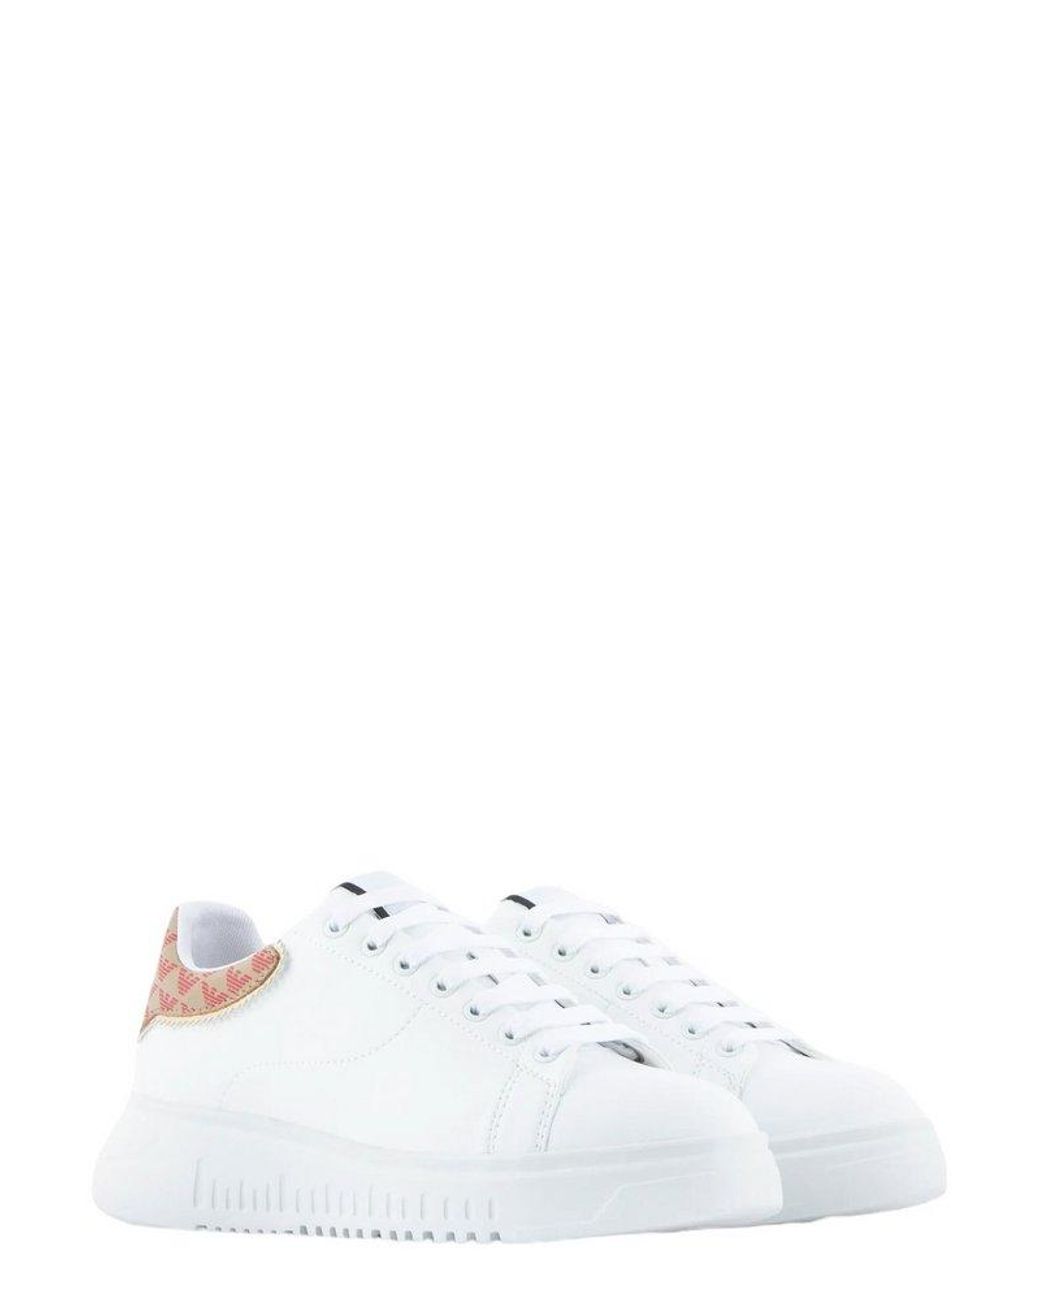 Emporio Armani Monogram Printed Lace-up Sneakers in White | Lyst